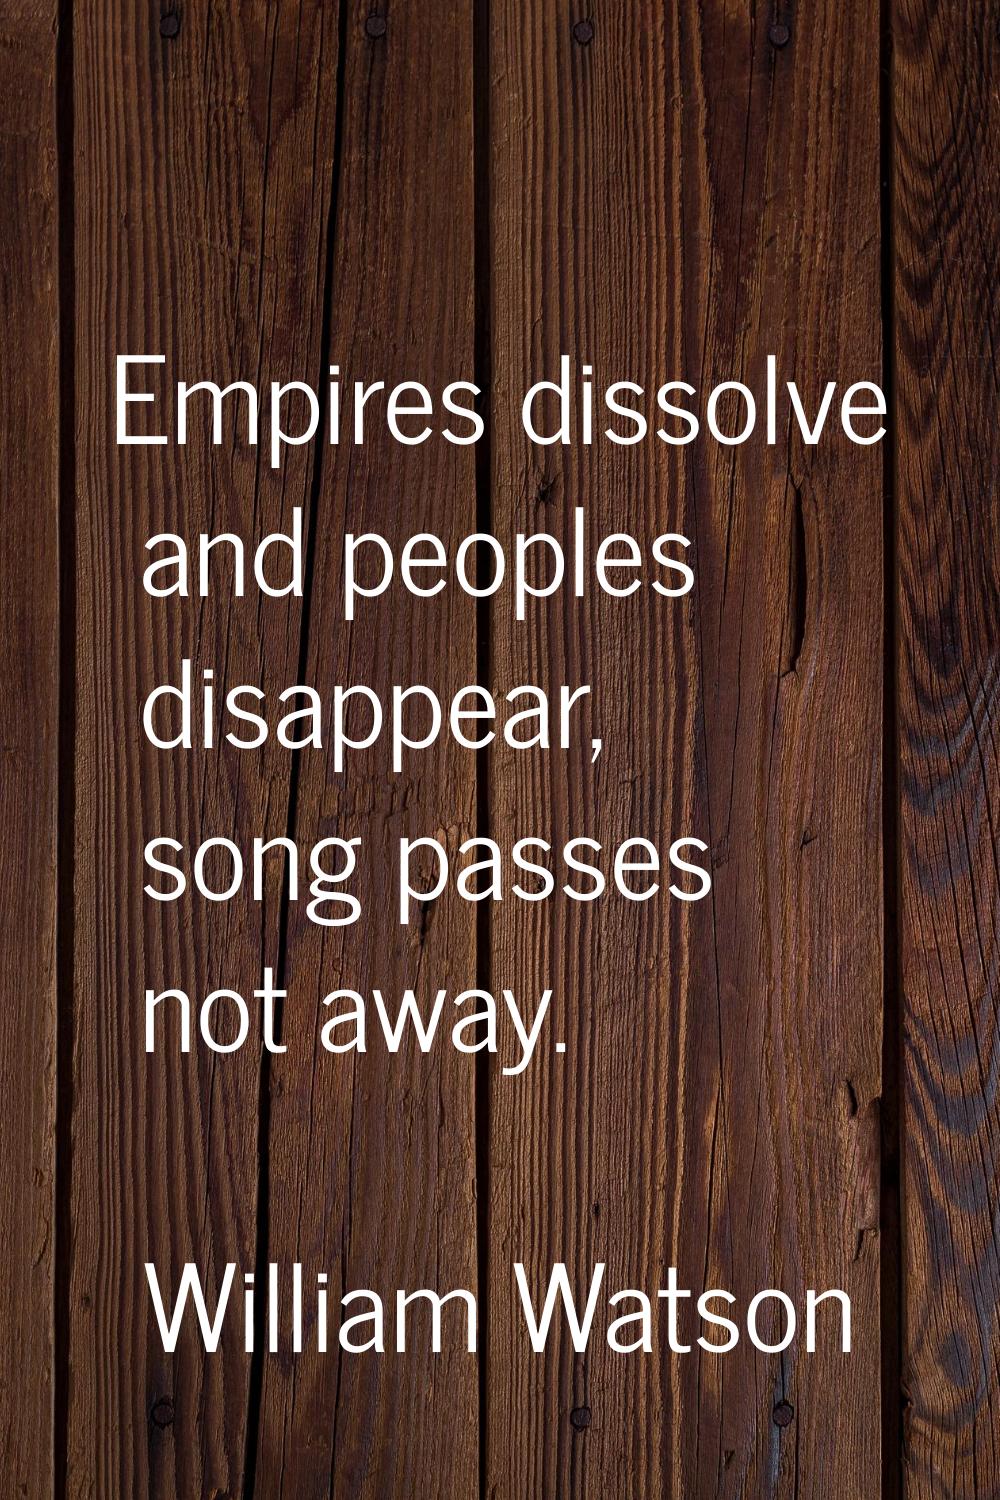 Empires dissolve and peoples disappear, song passes not away.